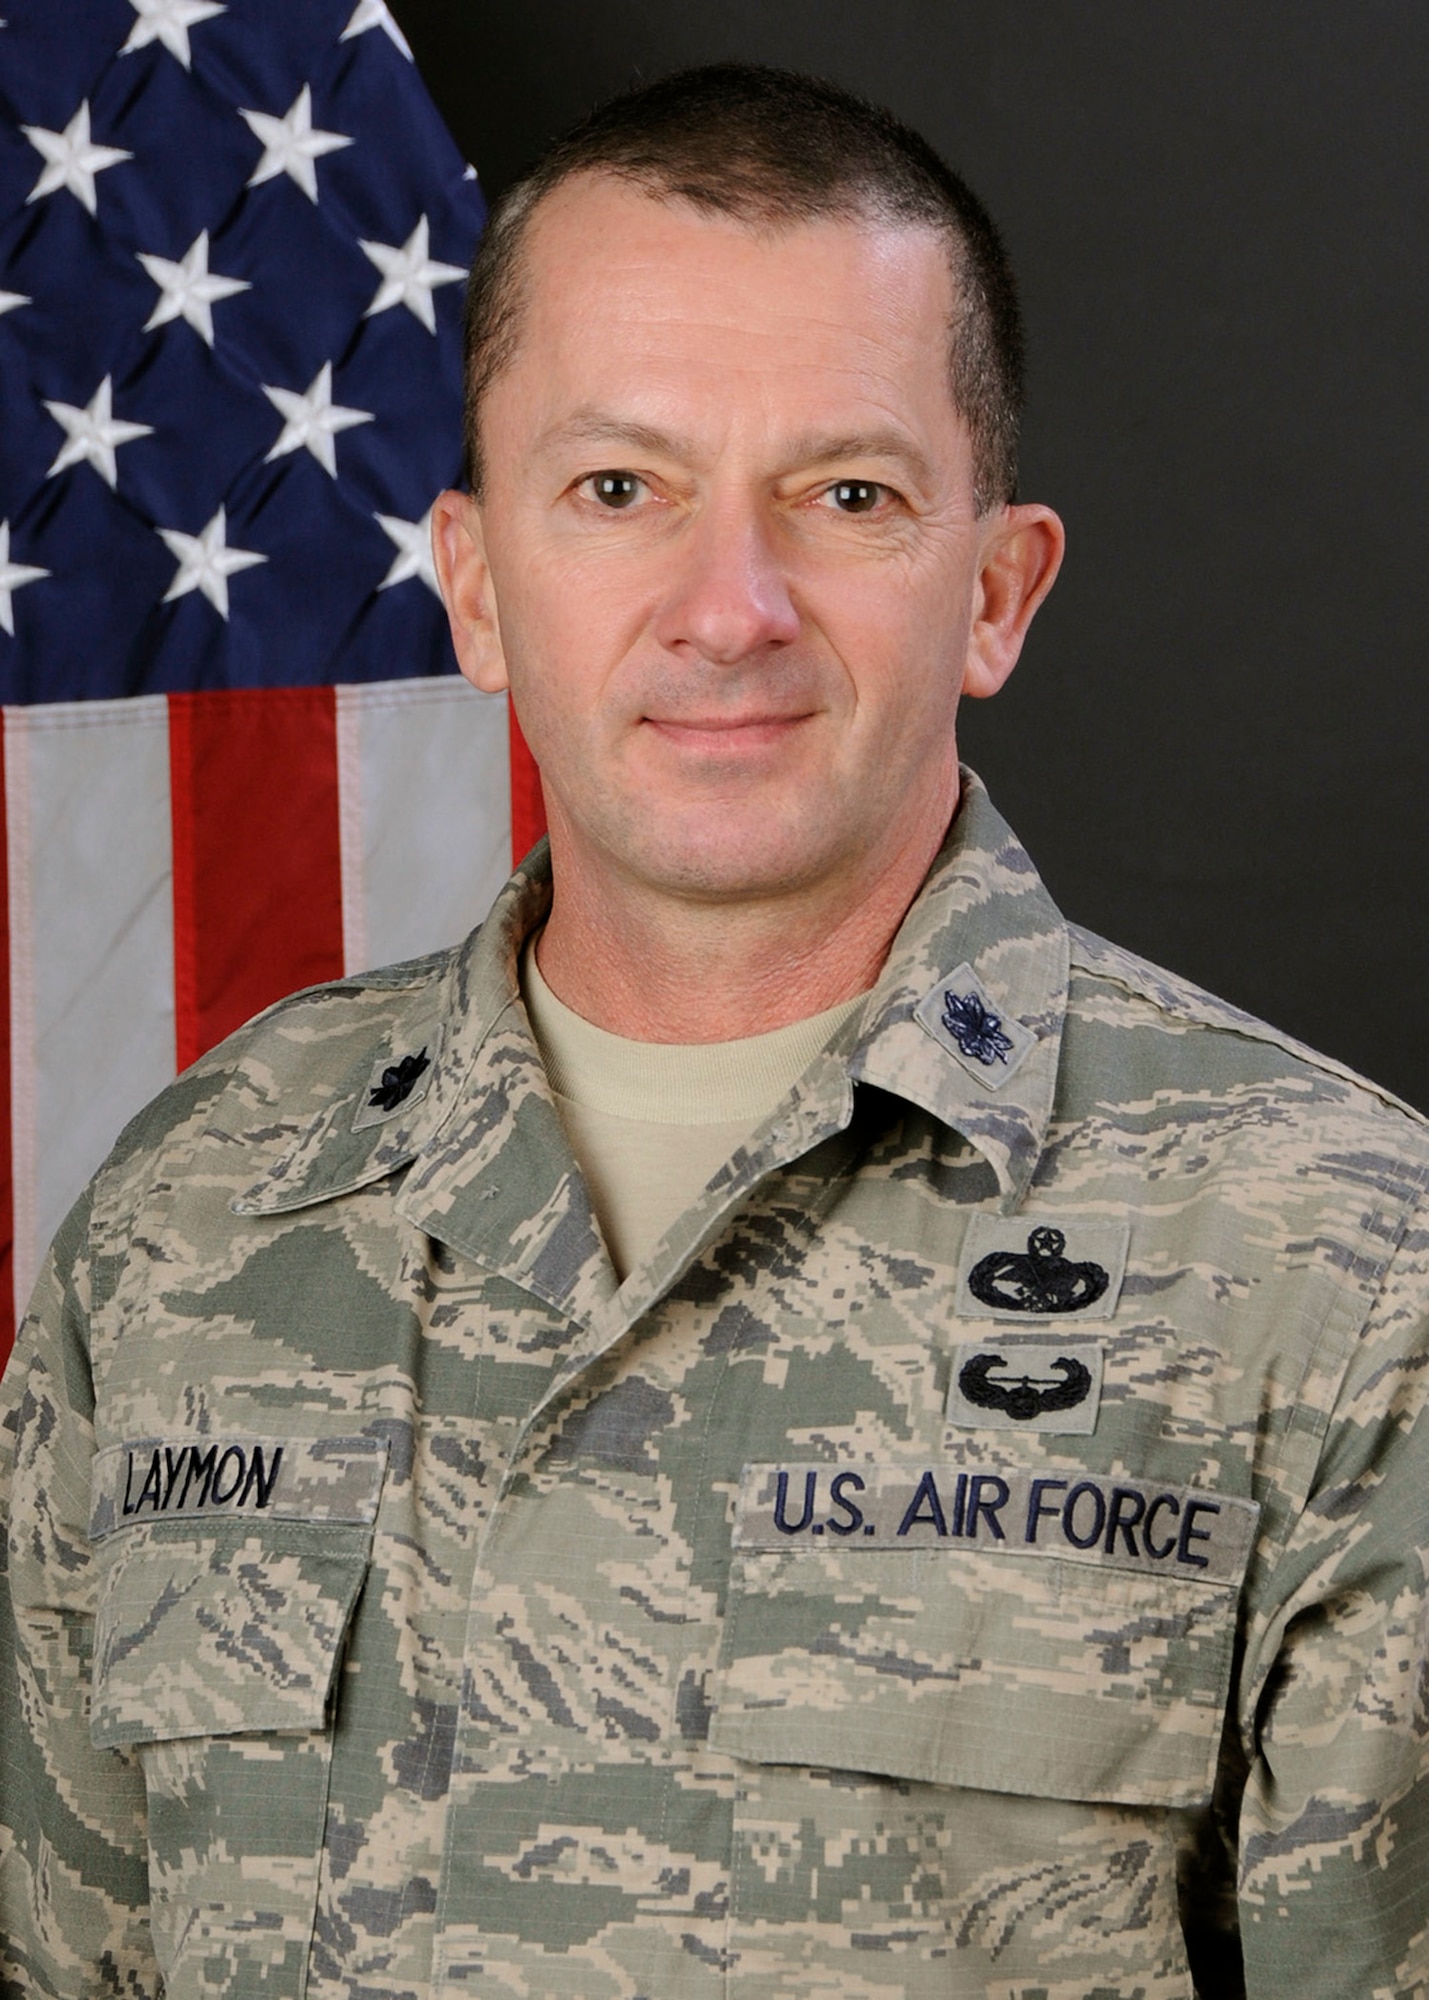 Lt.Col. Paul Laymon, Commander of the 169th Security Forces Squadron at McEntire Joint National Guard Base, S.C., Feb. 26, 2013. (U.S. Air National Guard photo by Tech. Sgt. Caycee Watson/Released)